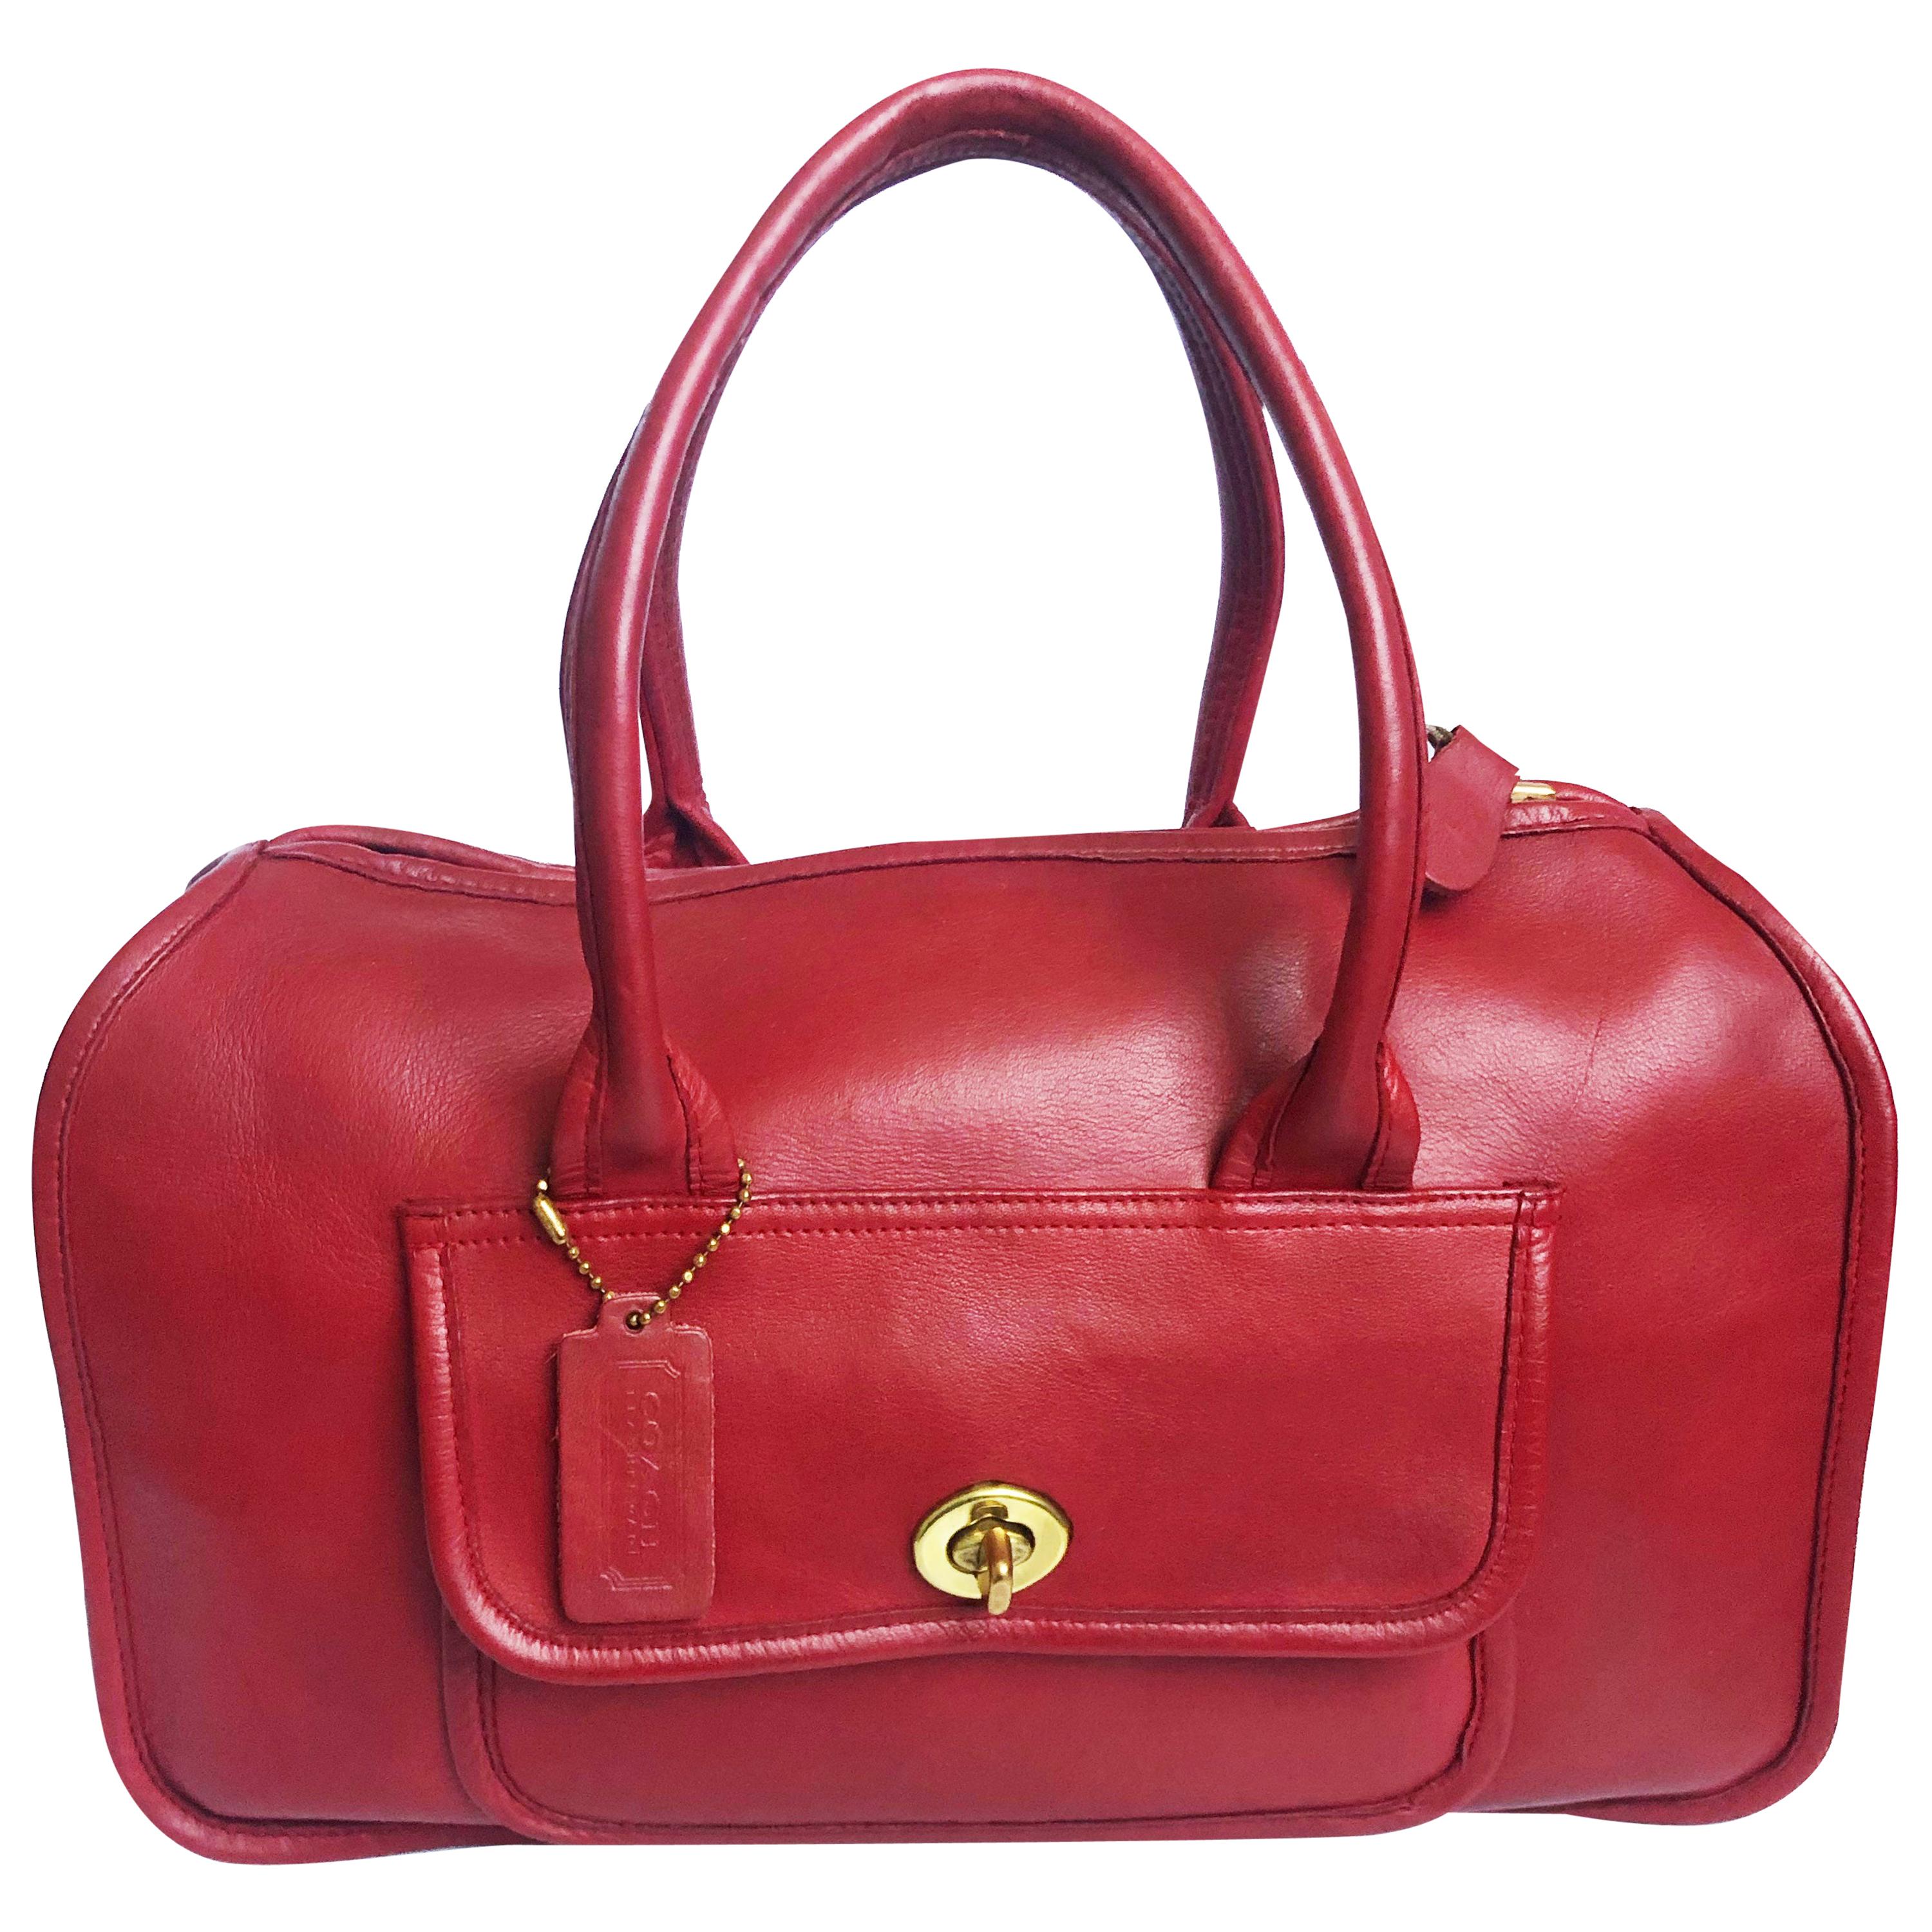 Bonnie Cashin for Coach Satchel Double Side Turn Lock Tote Bag Red Leather 60s